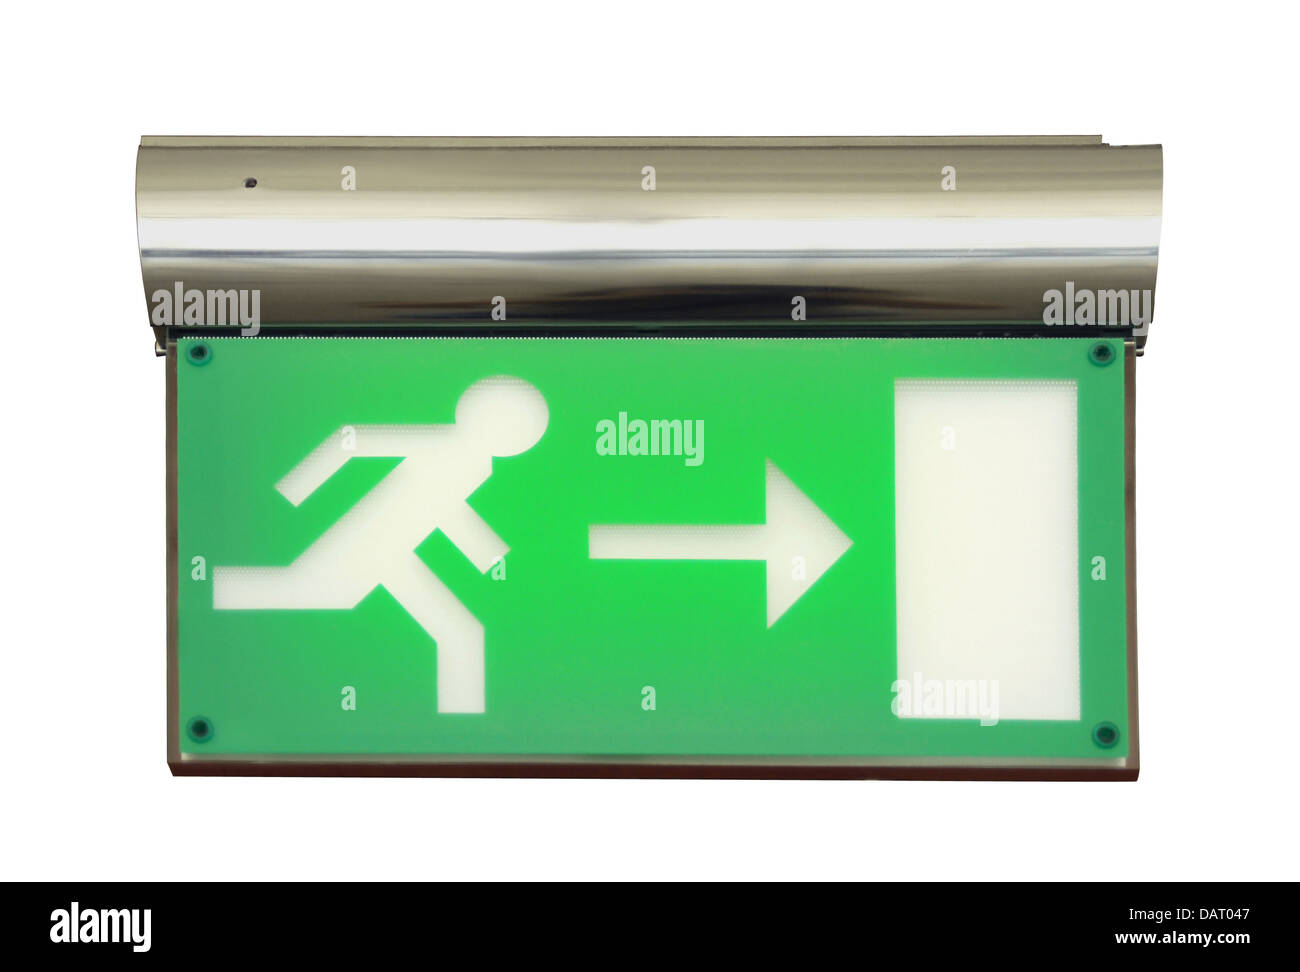 Emergency exit sign with clipping path Stock Photo